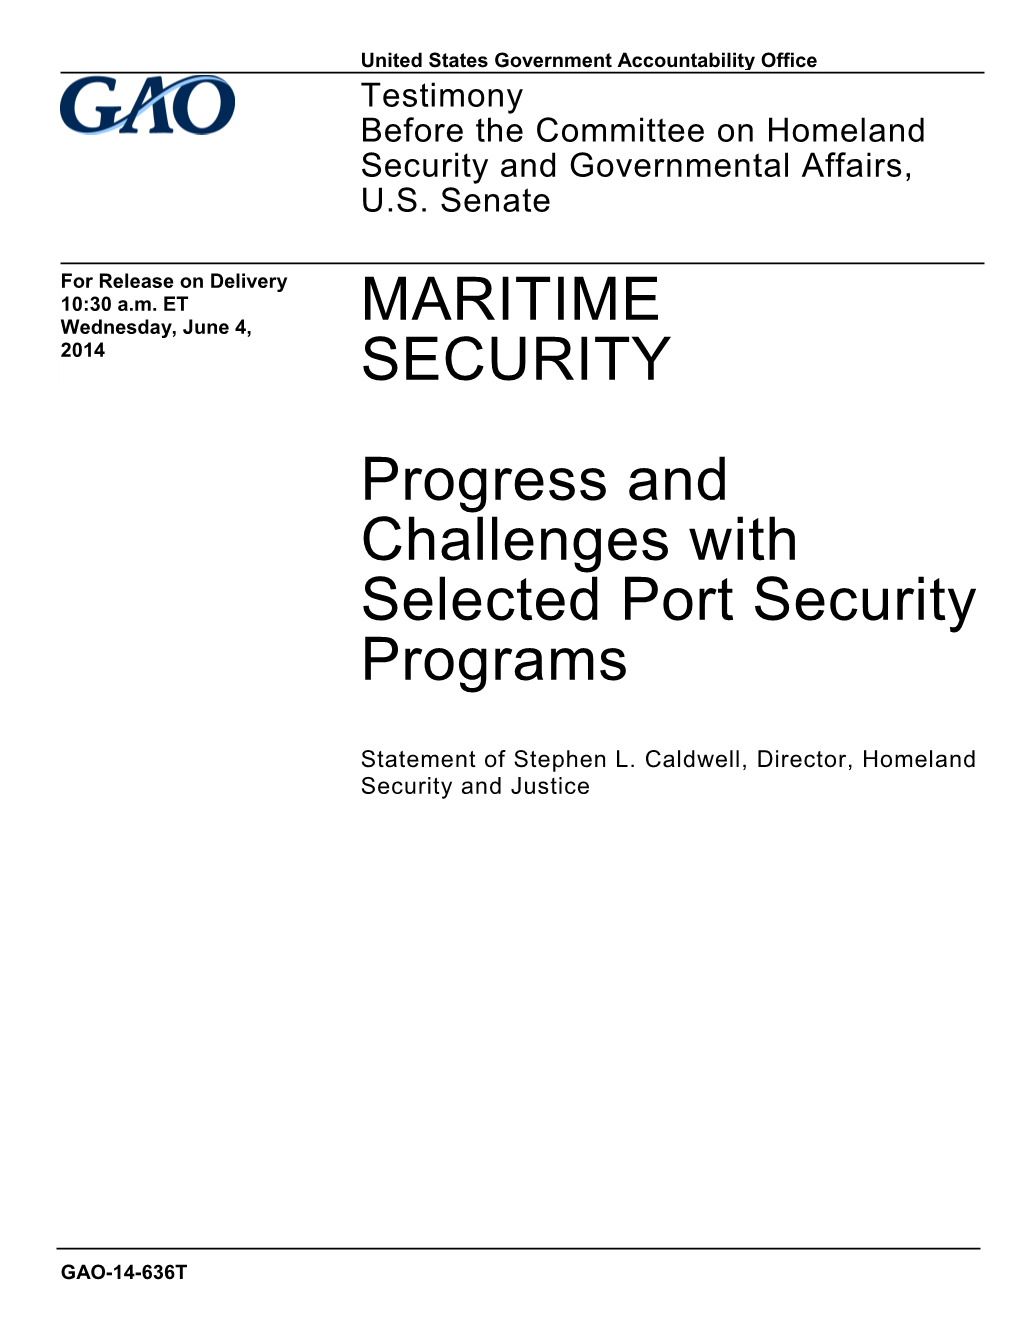 Progress and Challenges with Selected Port Security Programs